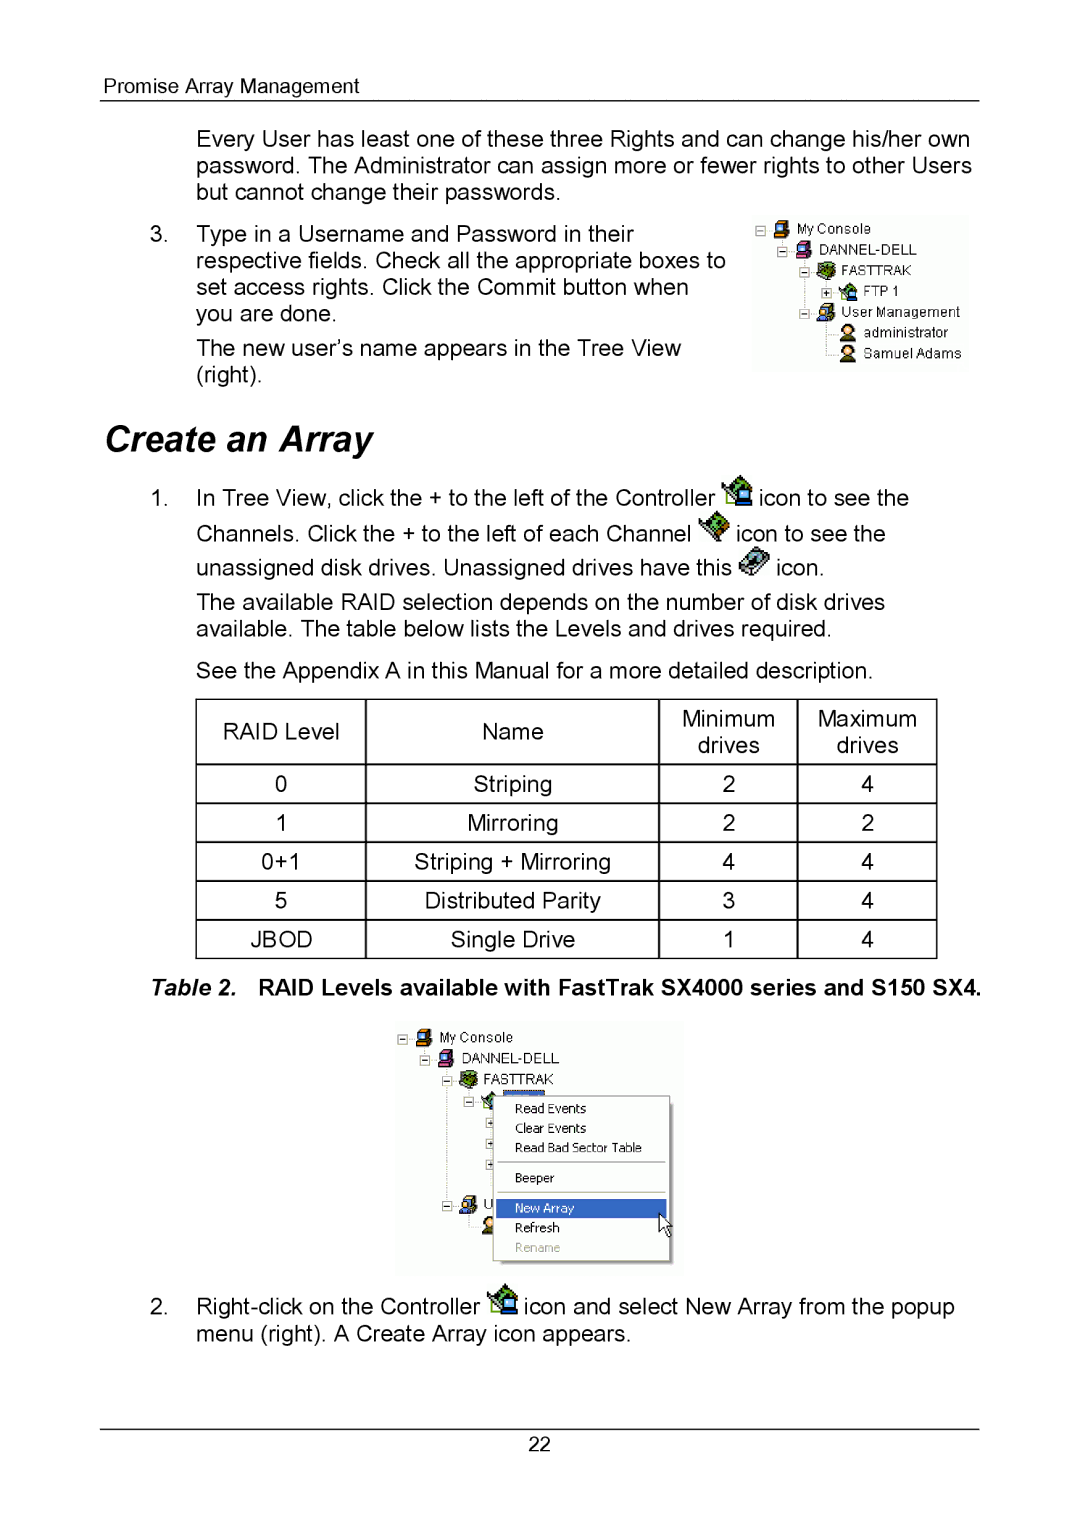 Promise Technology Version 4.4 user manual Create an Array 